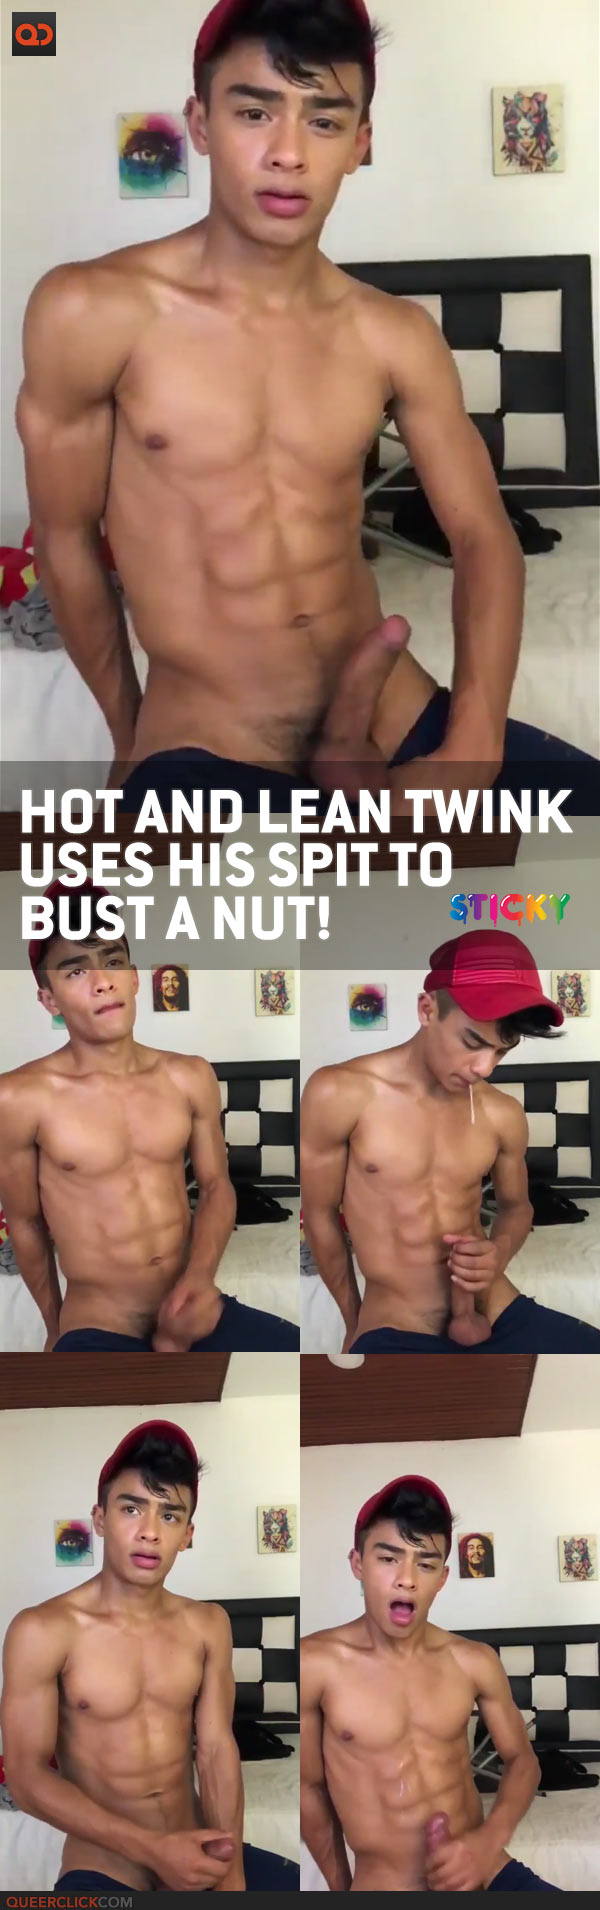 Hot And Lean Twink Uses His Spit To Bust A Nut!